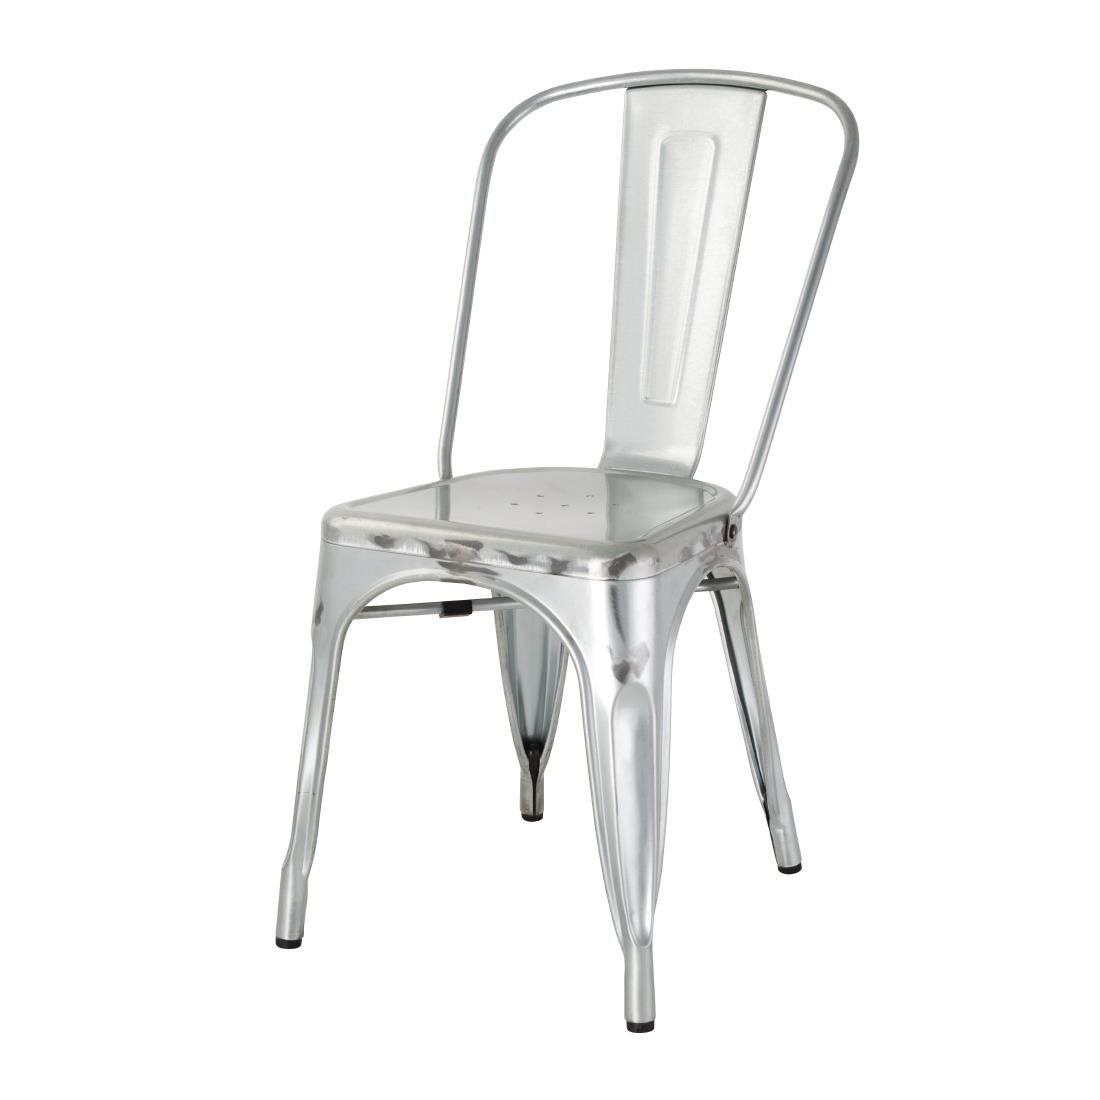 Bolero Bistro Galvanised Steel Side Chairs (Pack of 4) GL338 JD Catering Equipment Solutions Ltd